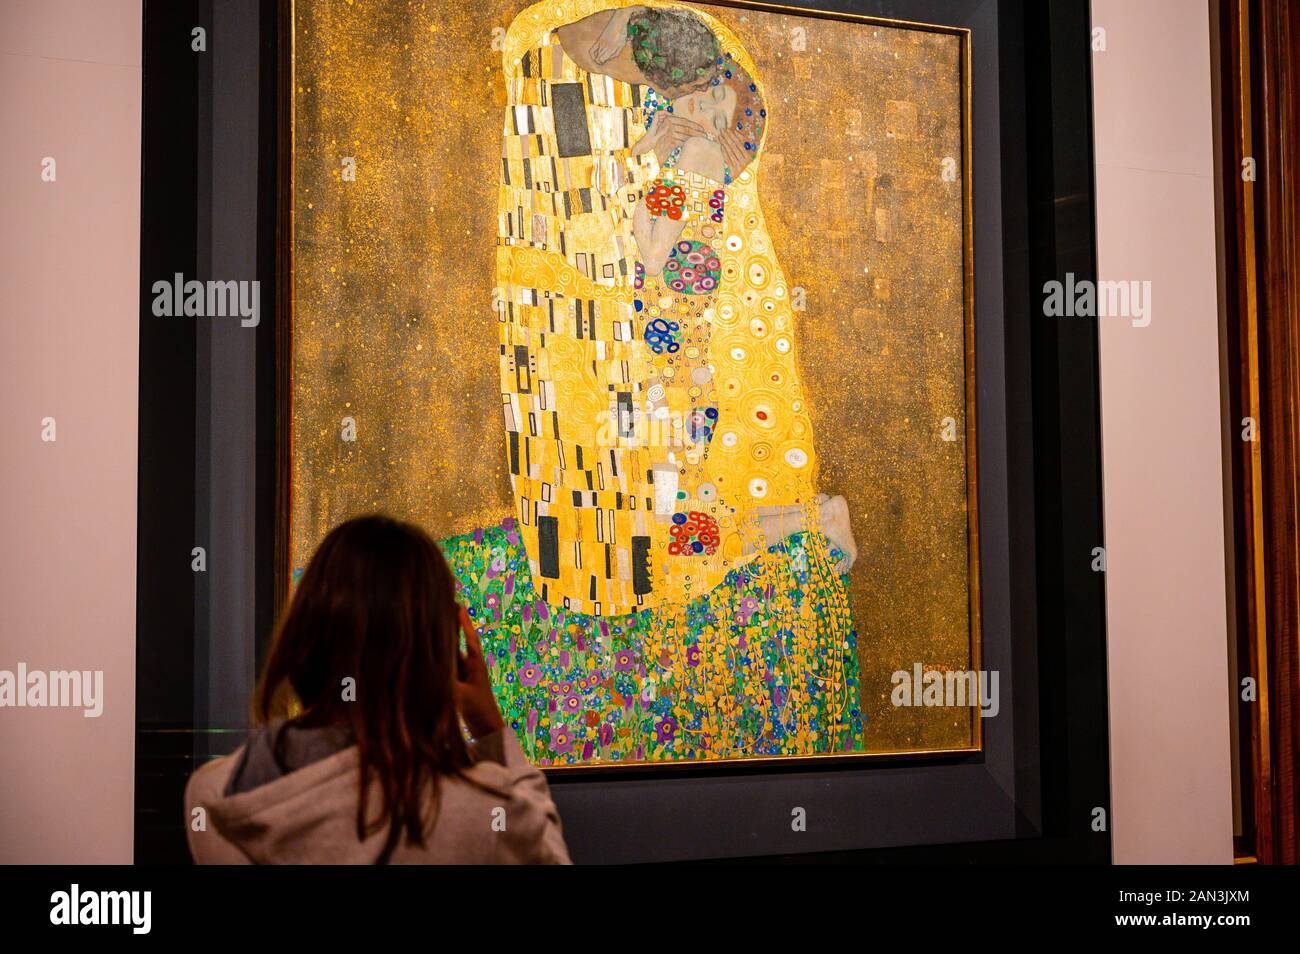 The Kiss (Lovers). Oil and gold leaf on canvas. 1907/1908. By the Austrian Symbolist painter Gustav Klimt. Belvedere Museum, Vienna, Austria. Stock Photo